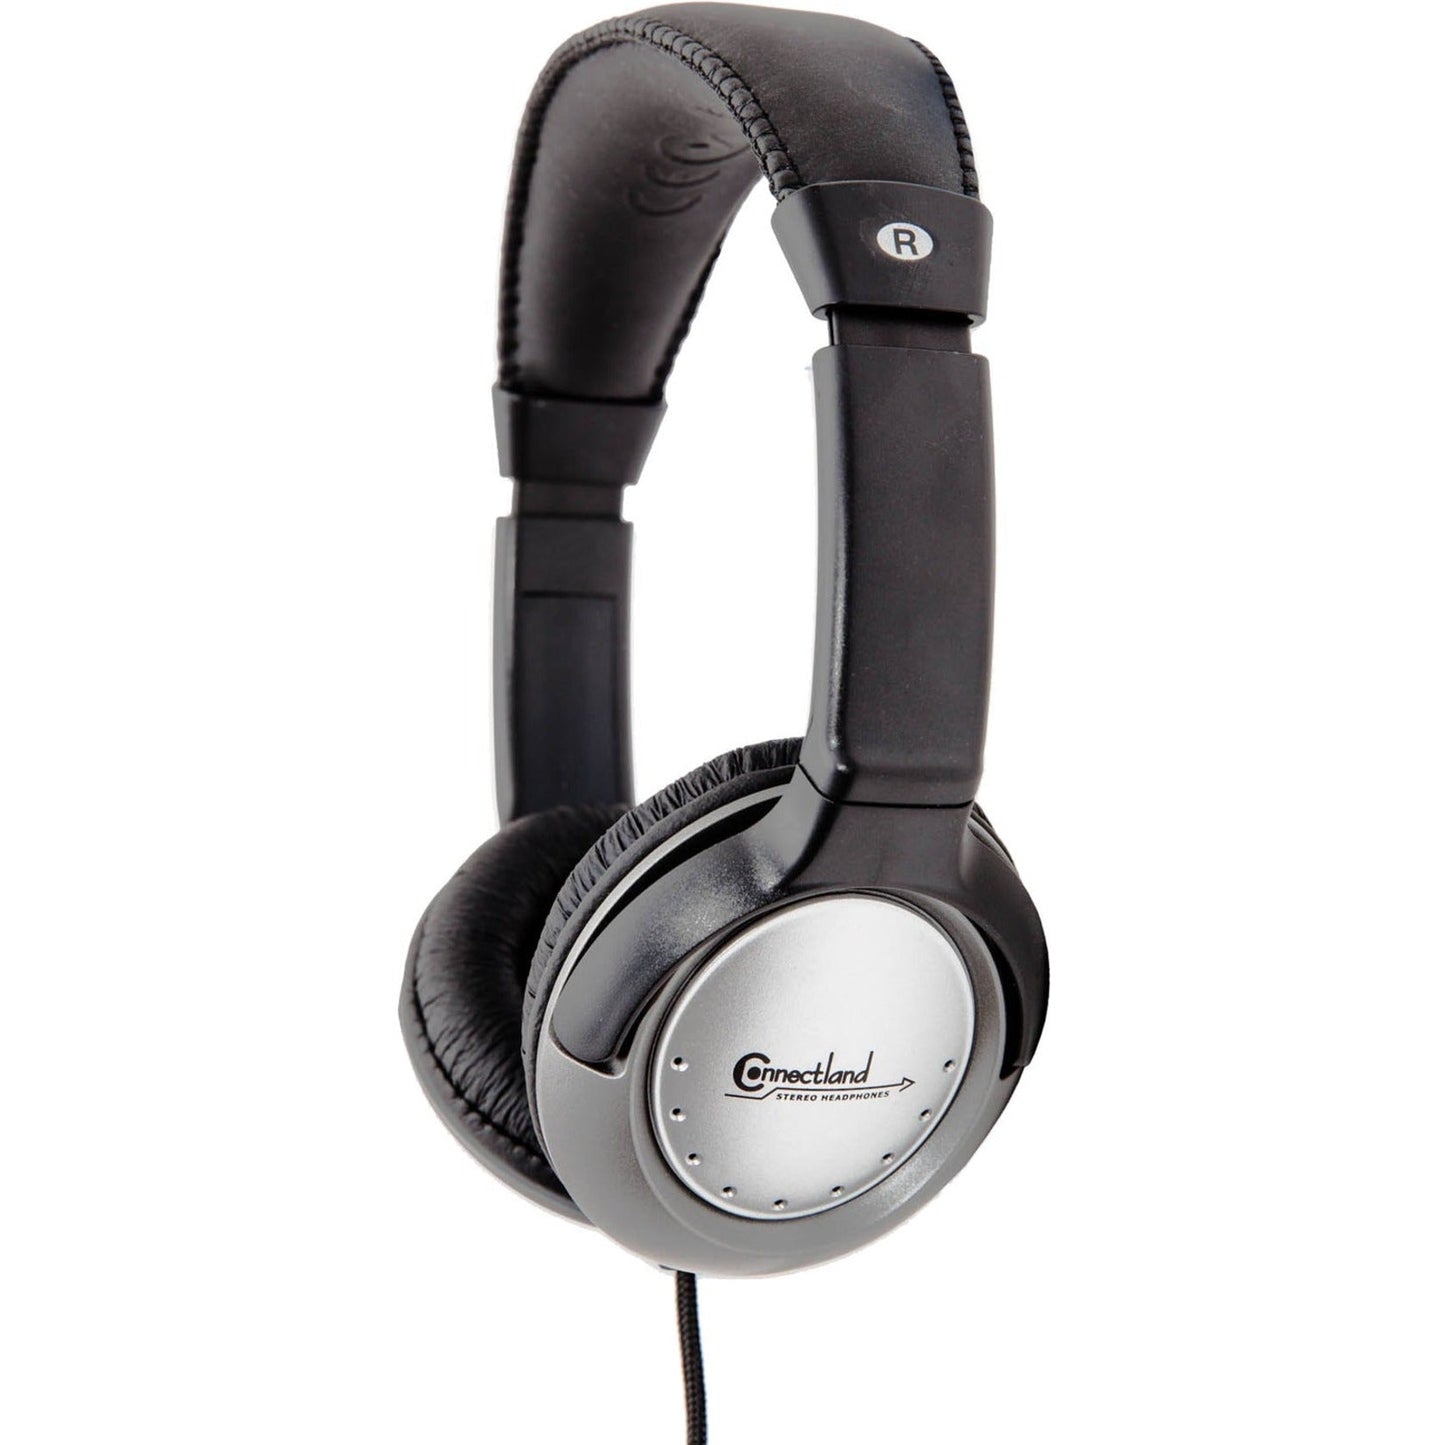 Connectland Stereo PC Headphone with In-line Contrlol and Microphone